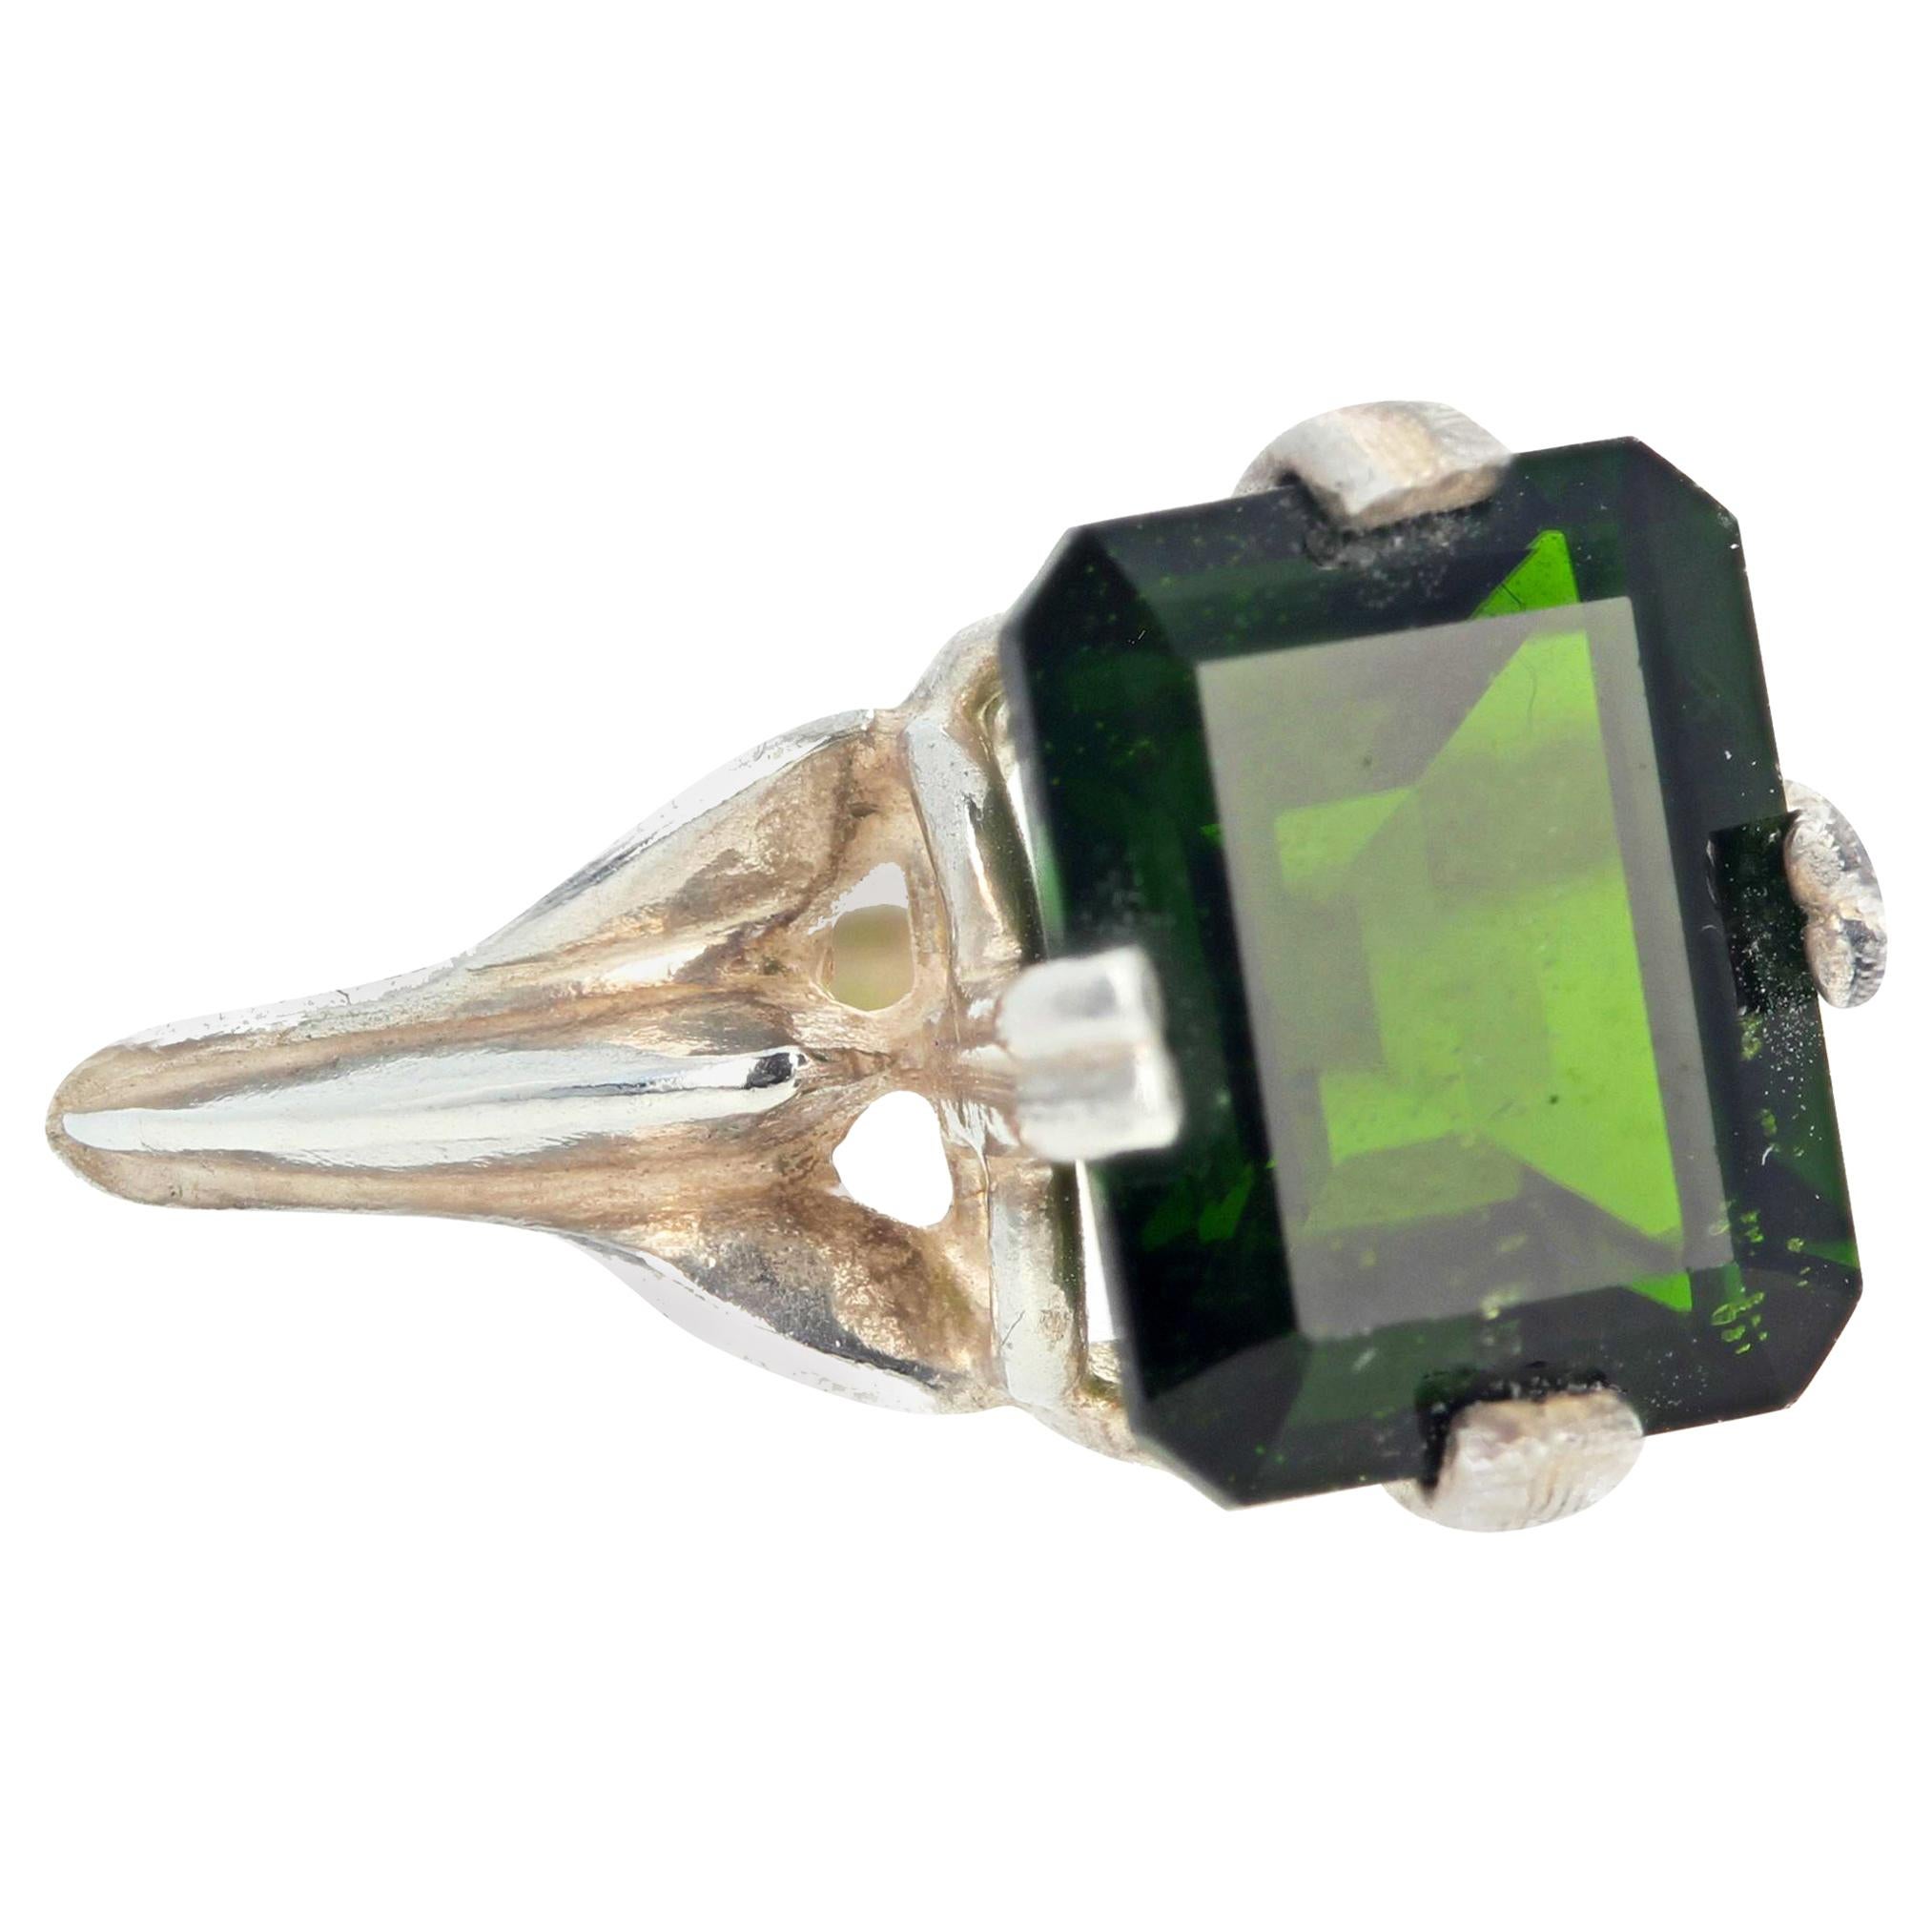 AJD Glowing Deep Green 2.8 Carat Chrome Diopside Sterling Silver Ring